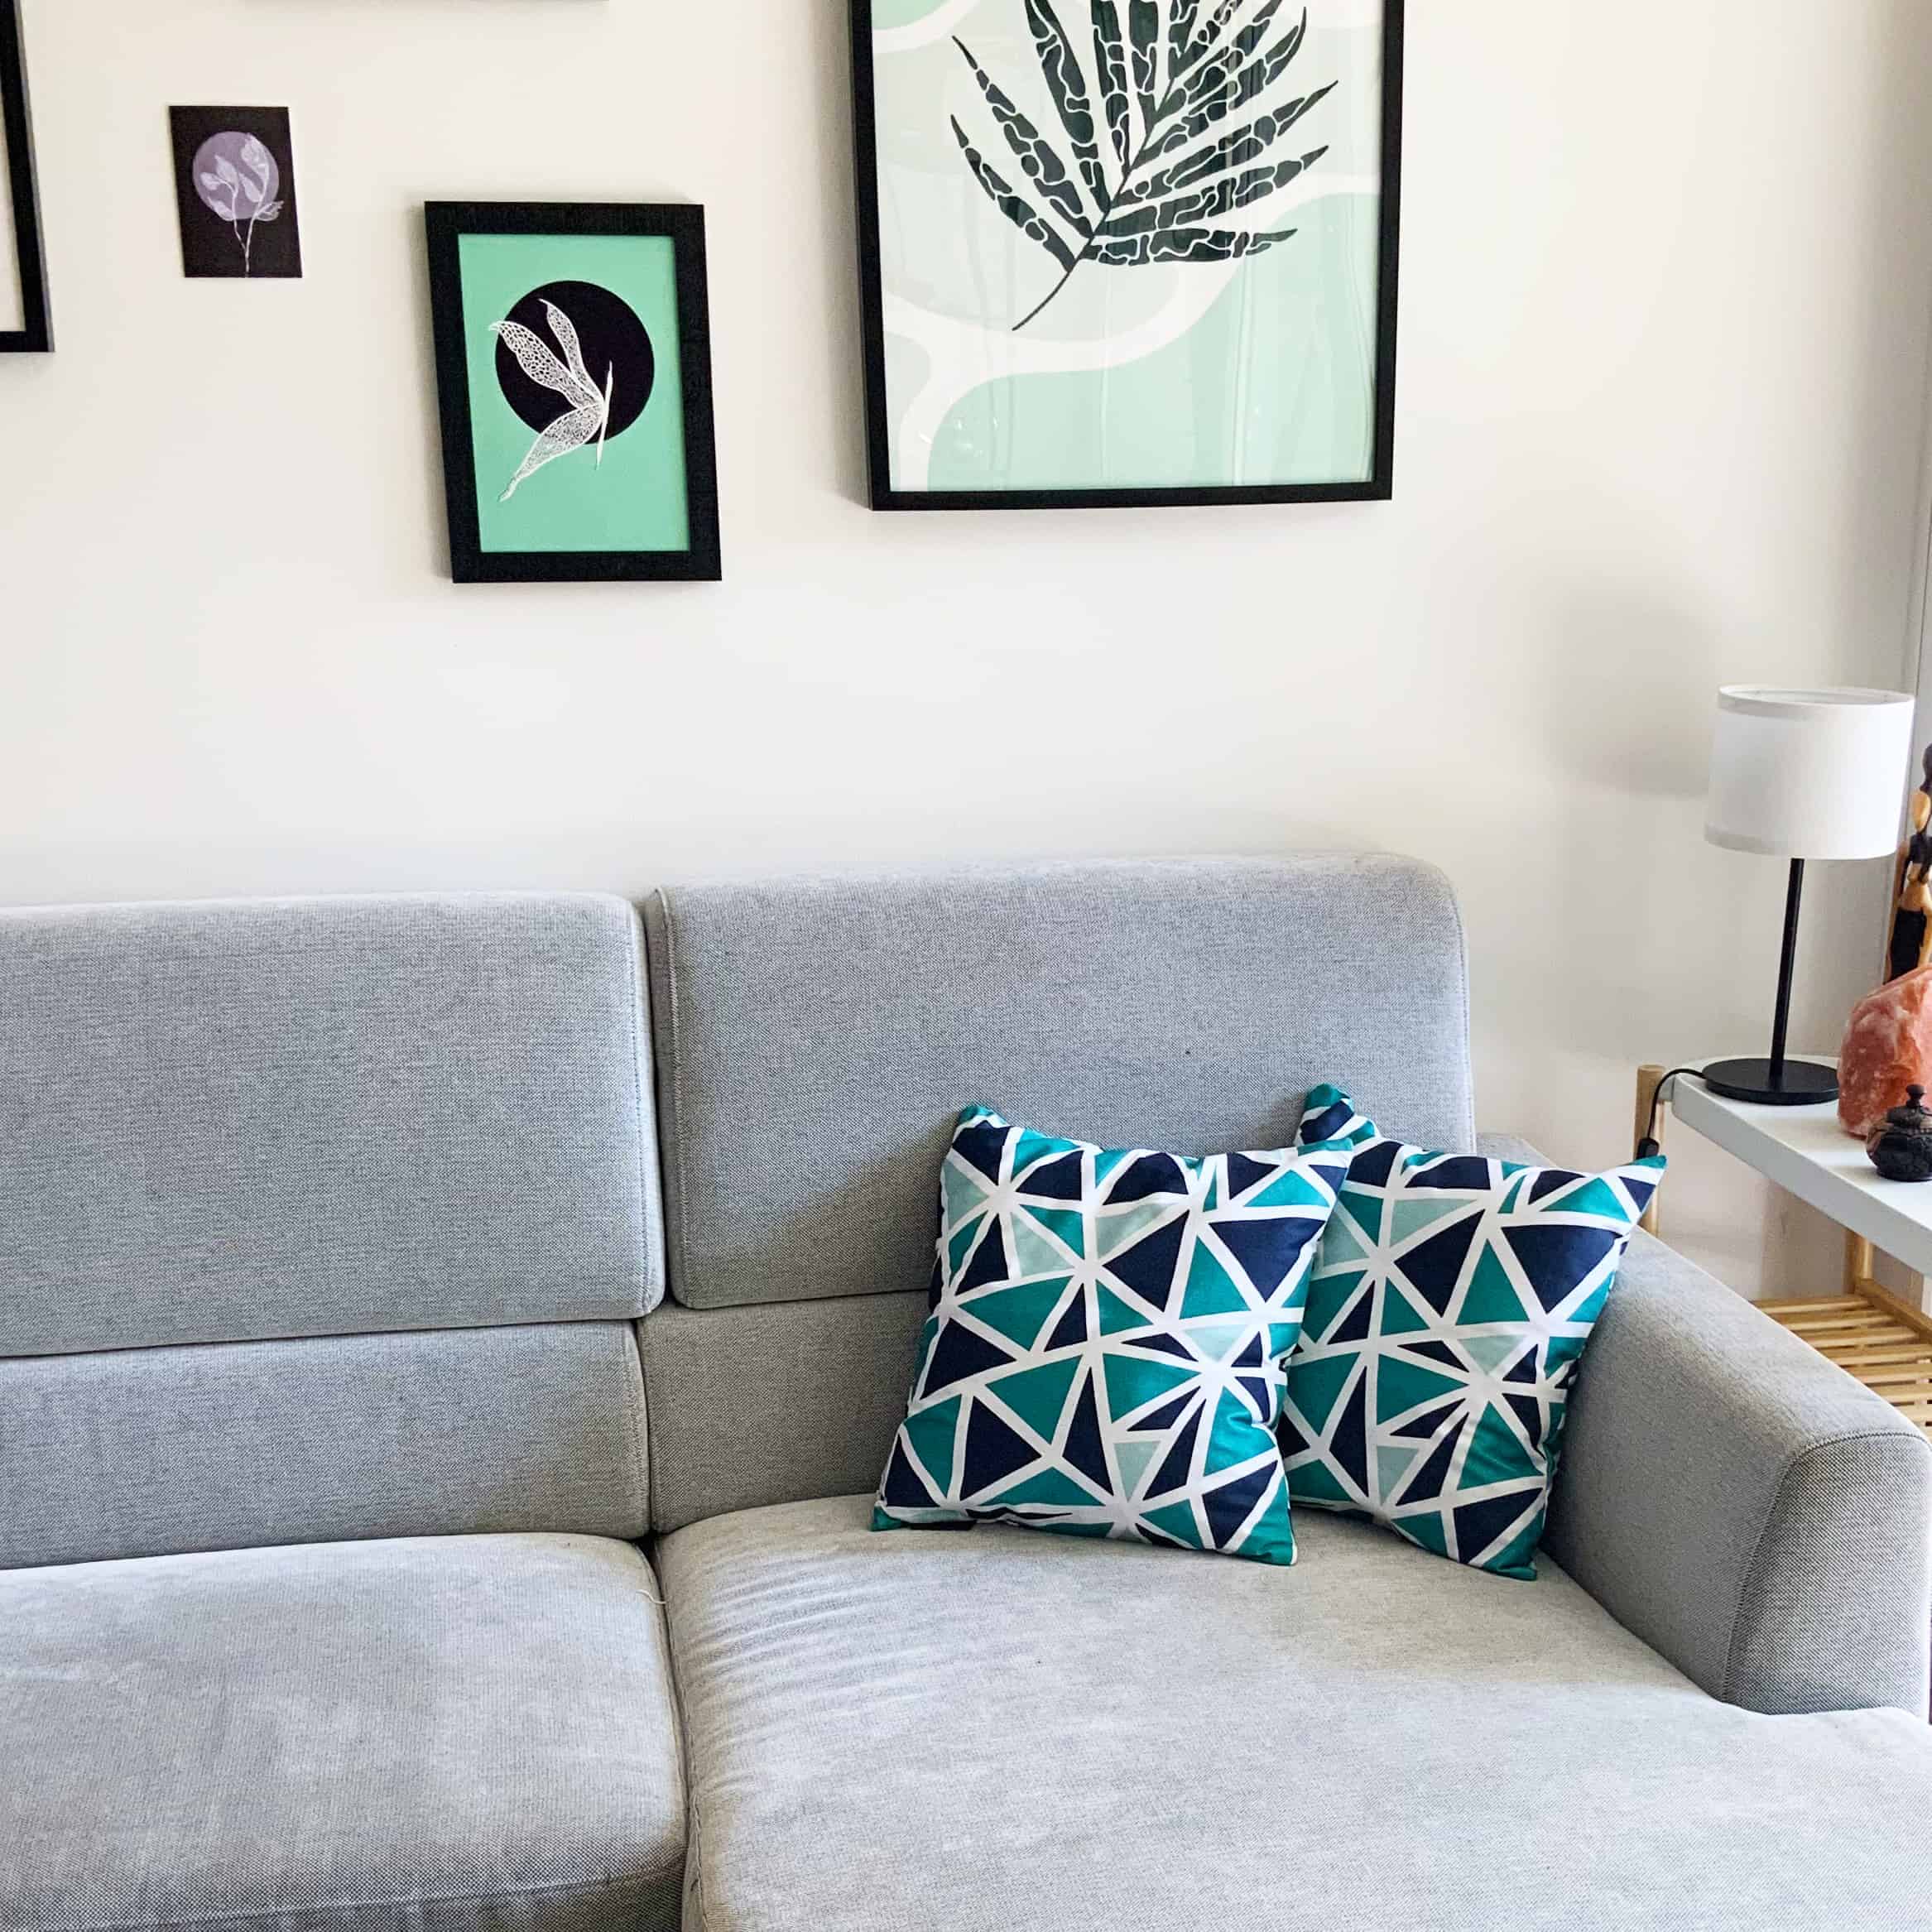 Grey couch with two blue bold pattern cushions, some framed green artwork on the wall behind